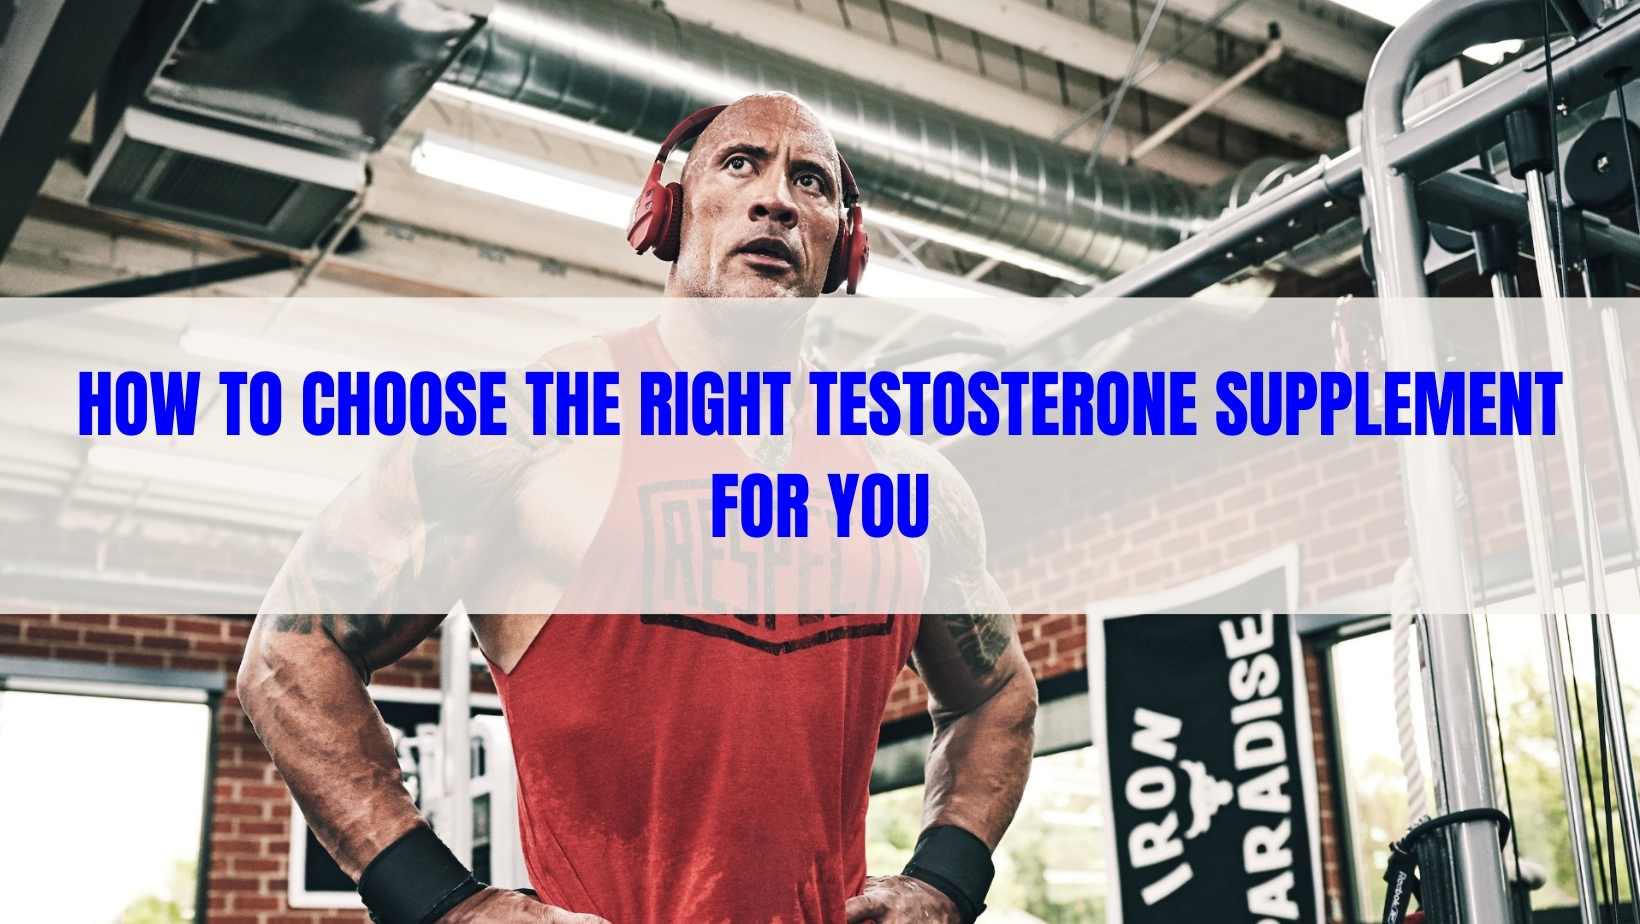 Testosterone-Supplement-for-You